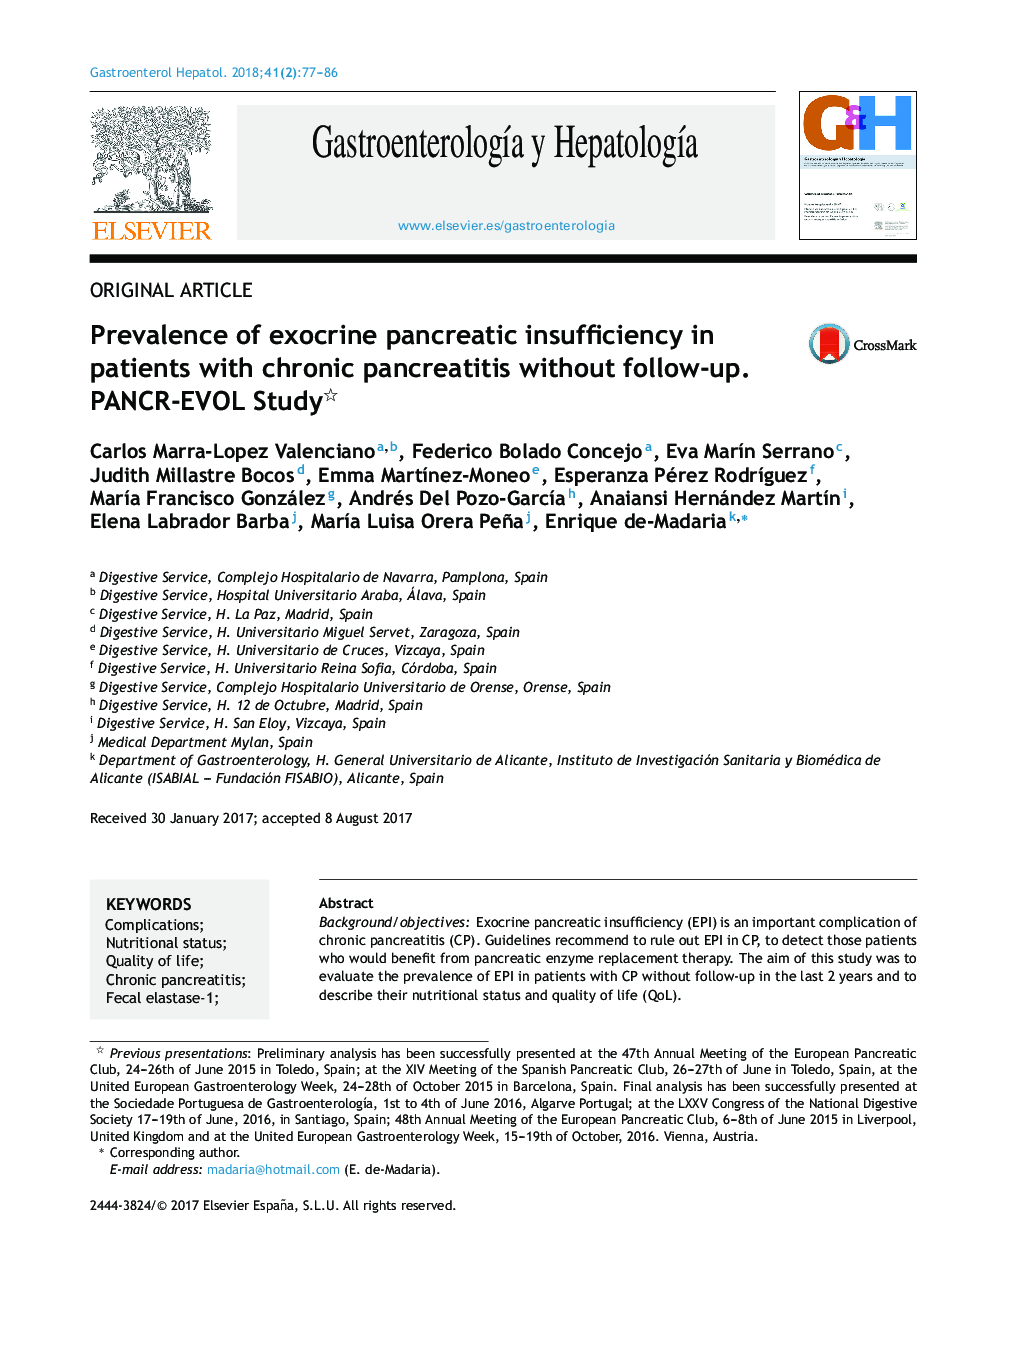 Prevalence of exocrine pancreatic insufficiency in patients with chronic pancreatitis without follow-up. PANCR-EVOL Study